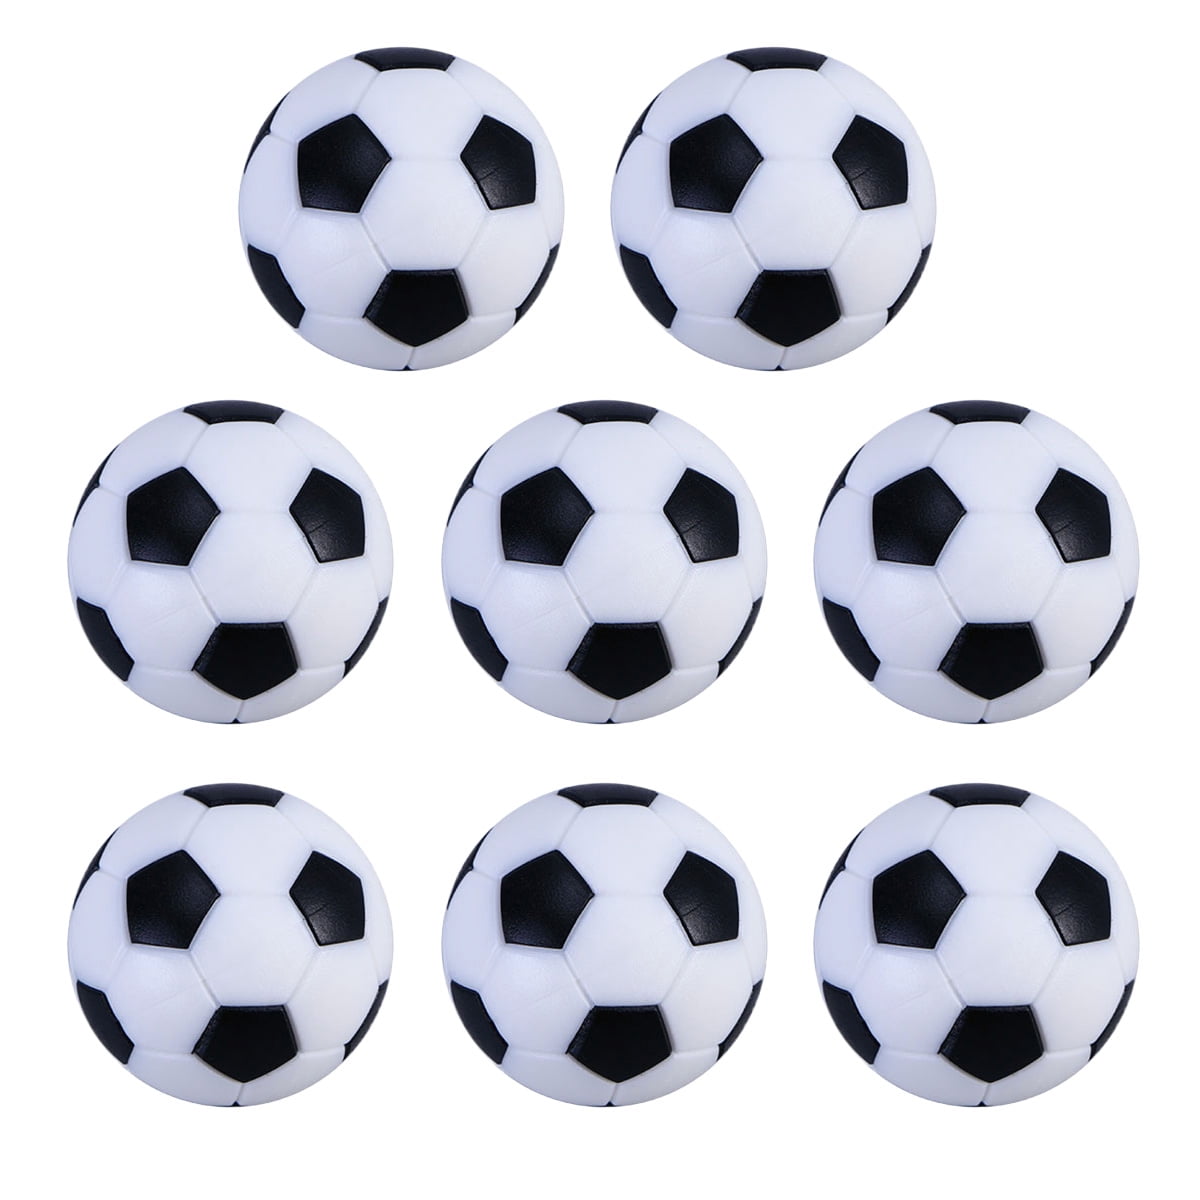 36mm Indoor Soccer Table Foosball Replacement S Fussball Football Ball F7C6 F7F1 